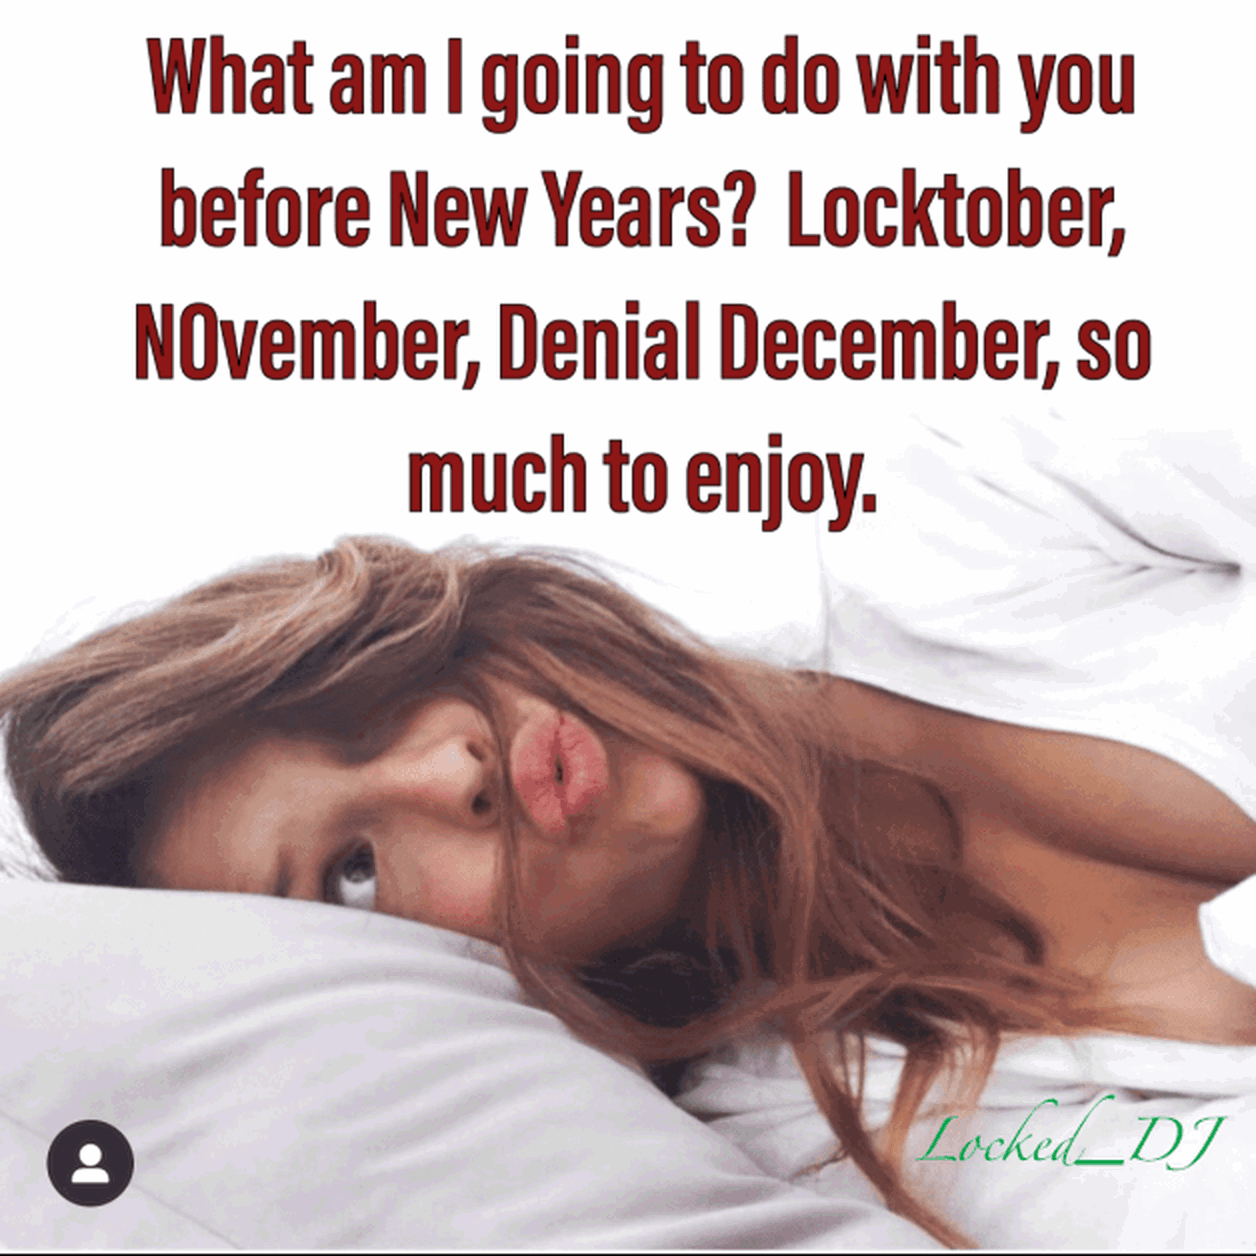 Watch the Photo by Locked.DJChastity with the username @Locked.DJChastity, posted on September 11, 2021. The post is about the topic Male Chastity. and the text says 'So many days left this year for you to think about. 
         #chastity, #malechastity, #chastitymansion, #cagedcock, #cagedcocks, #cockcage, #flr, #chastitycage, #chastityslave, #keyholder, #malechastitydevice, #chastitykeyholder, #peniscage, #balltrap,..'